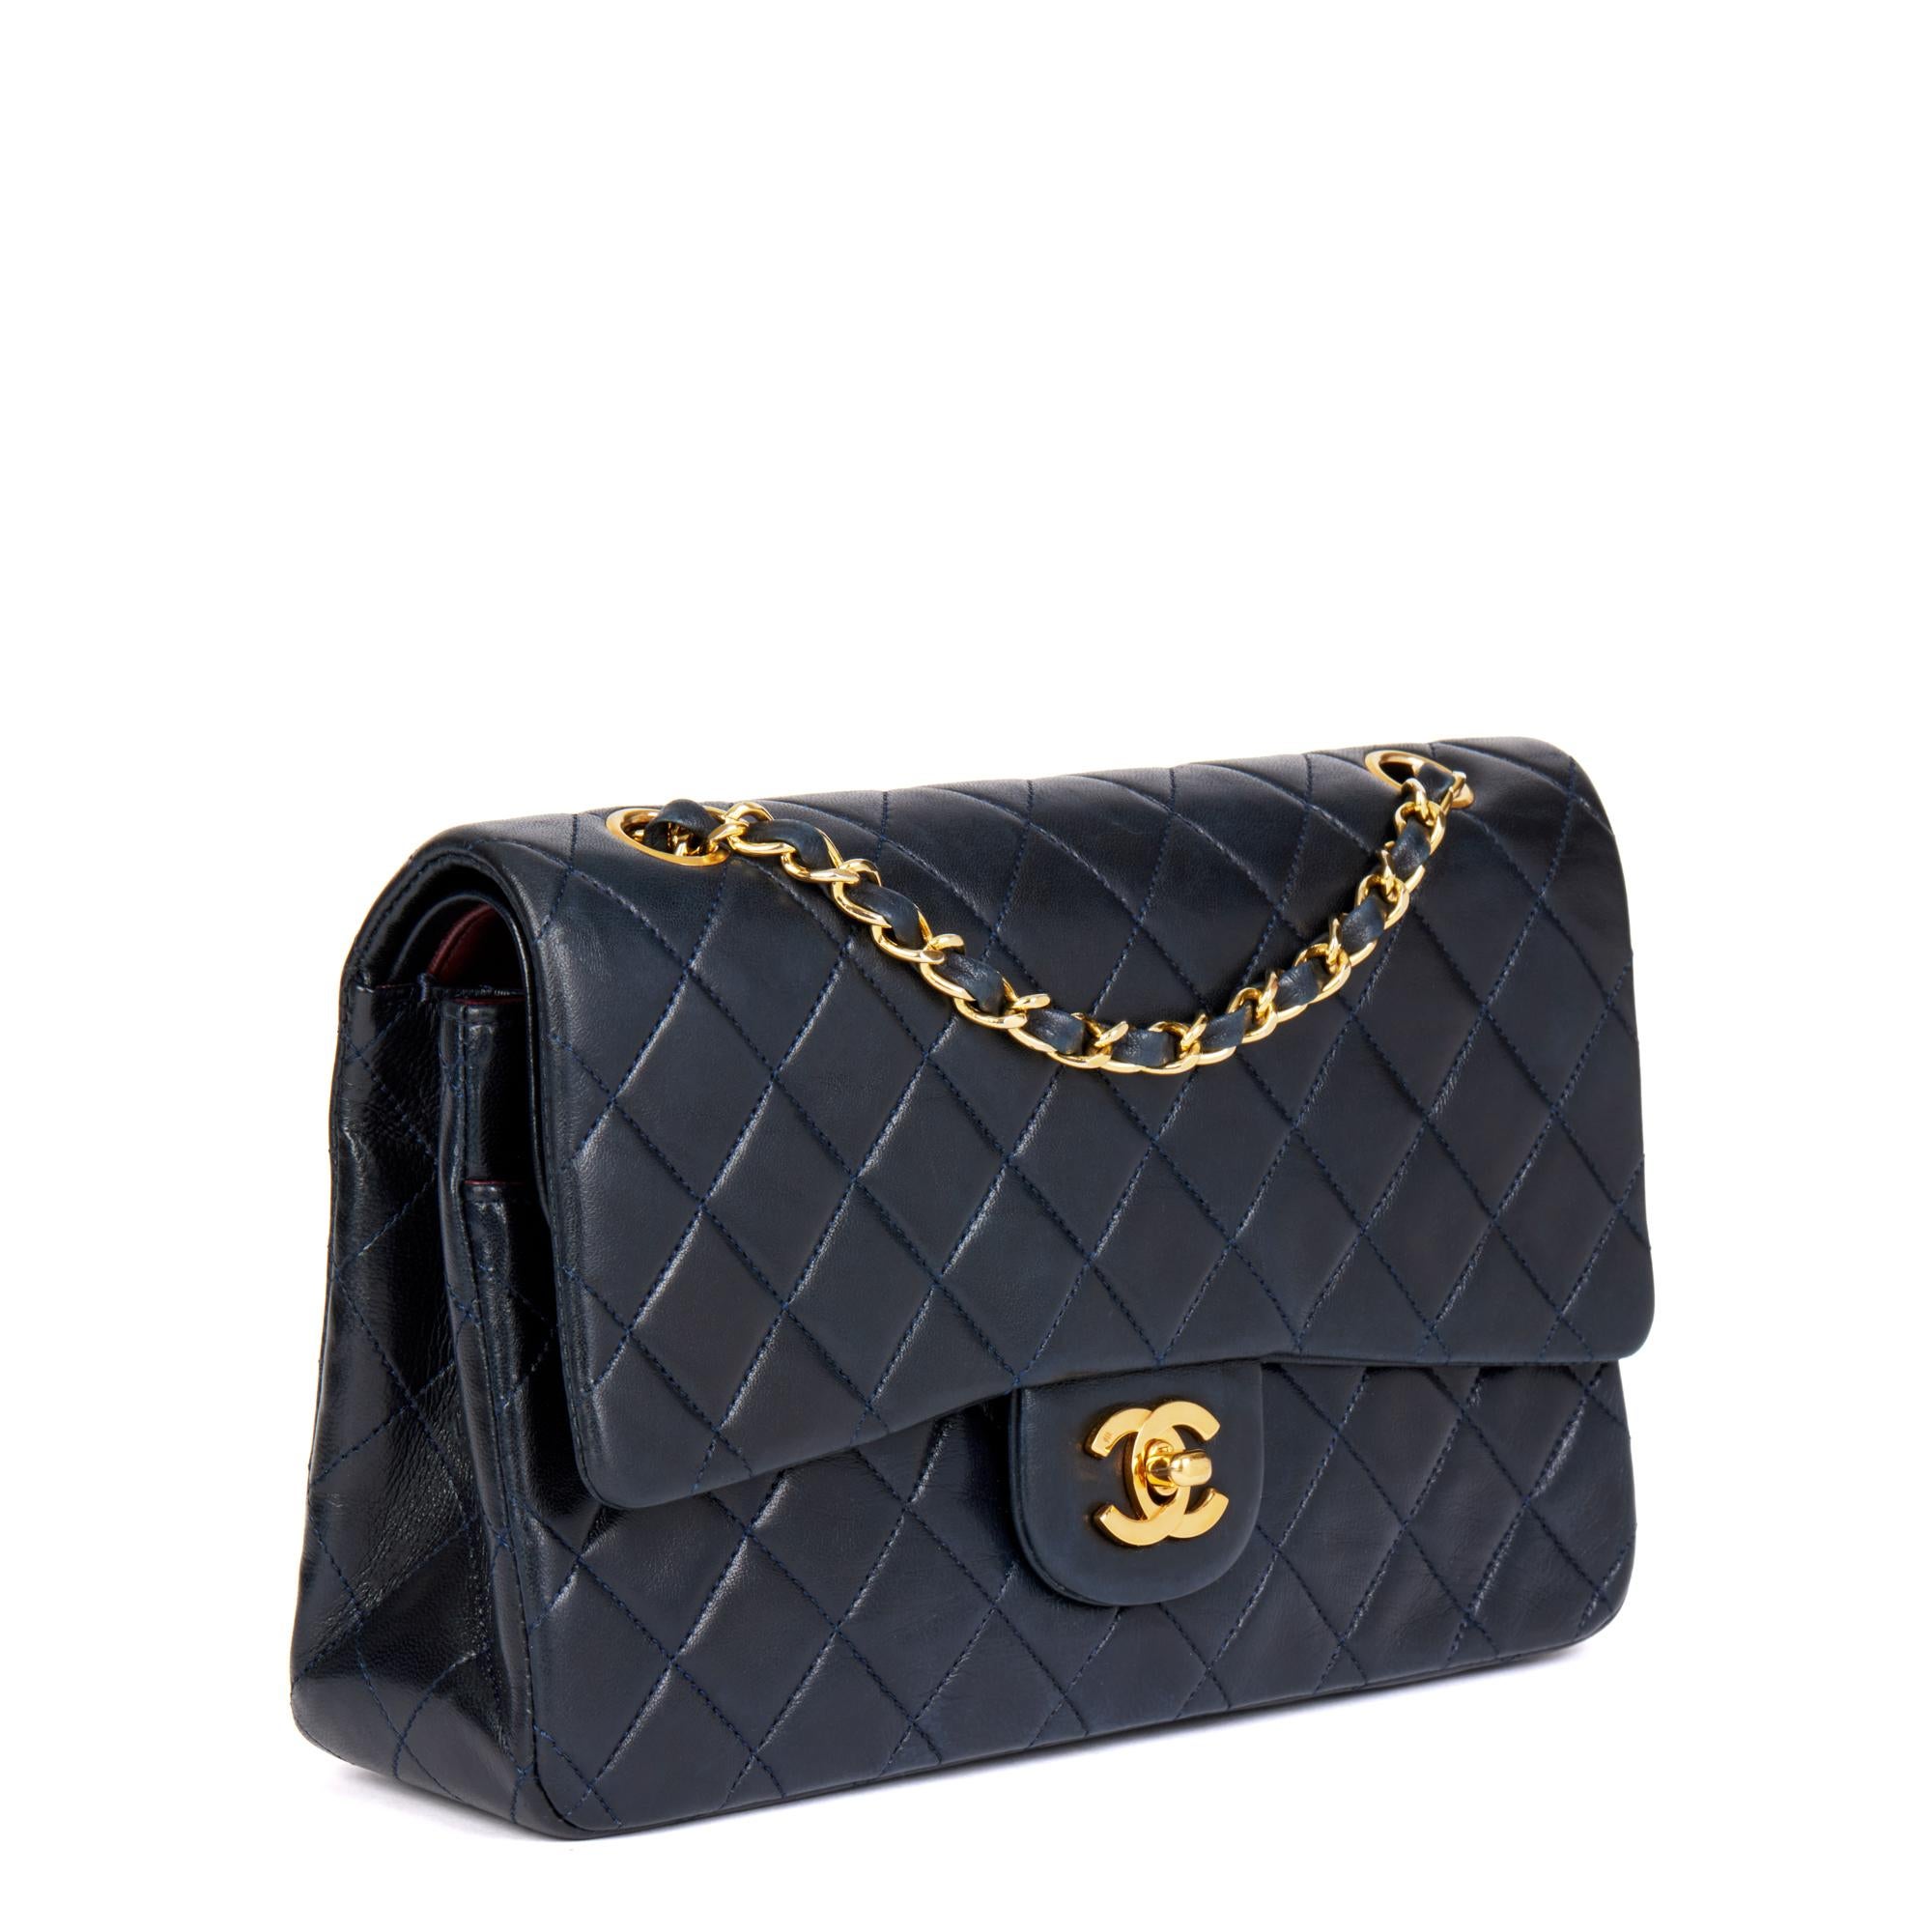 CHANEL
Navy Quilted Lambskin Vintage Medium Classic Double Flap Bag 

Xupes Reference: HB4719
Serial Number: 1396570
Age (Circa): 1990
Accompanied By: Authenticity Card
Authenticity Details: Authenticity Card, Serial Sticker (Made in France)
Gender: